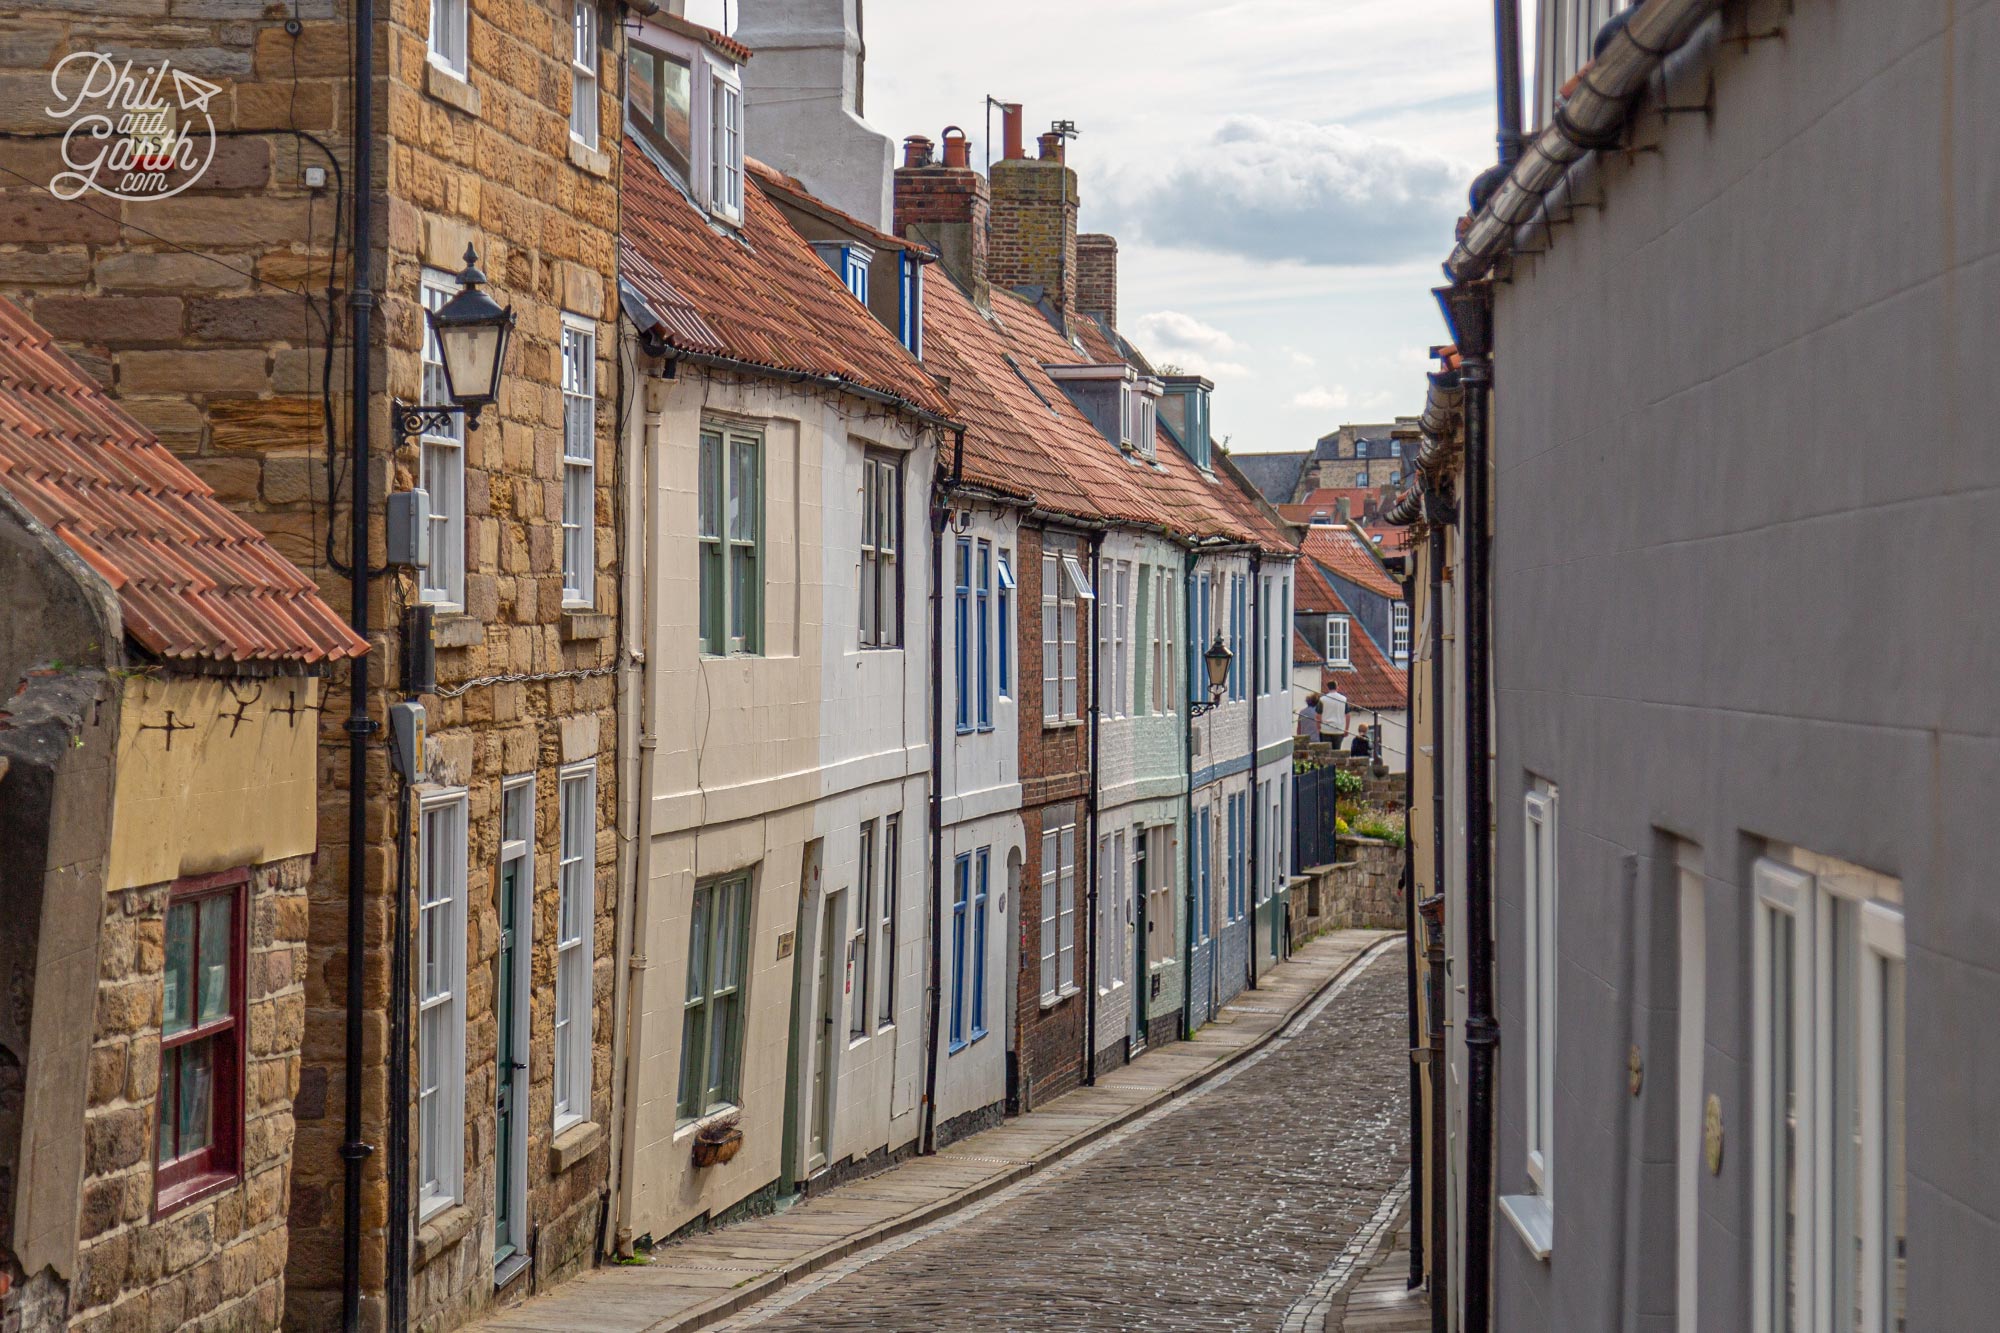 Attractions in Whitby - picturesque winding streets in the old town